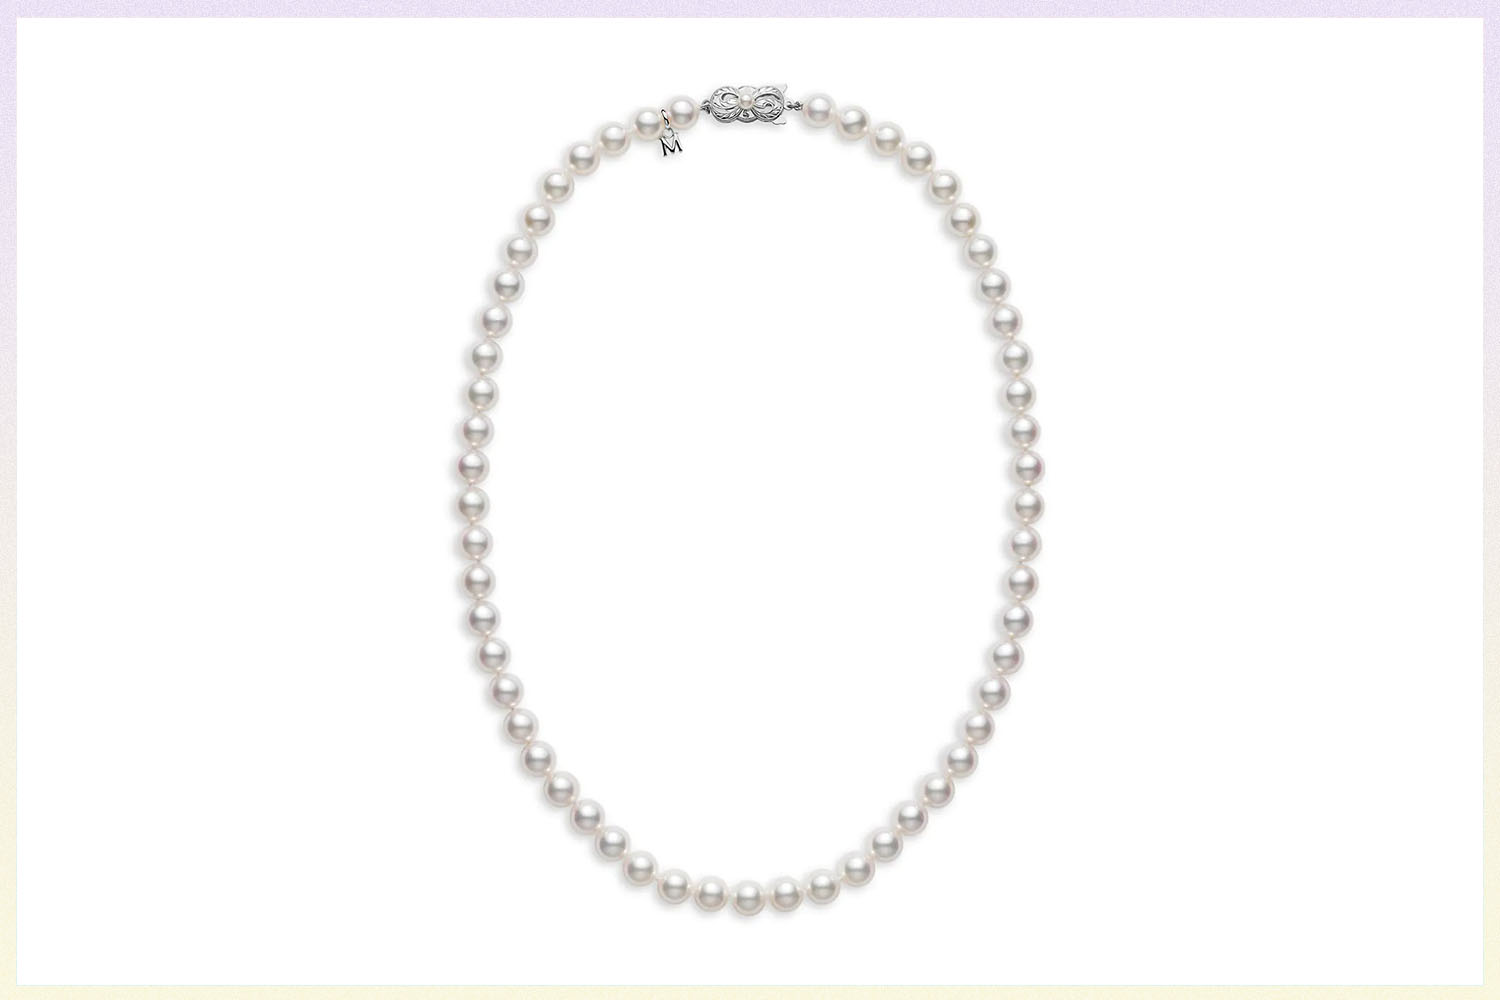 Mikimoto Essential Elements 18K White Gold & 6.5MM White Cultured Akoya Pearl Strand Necklace